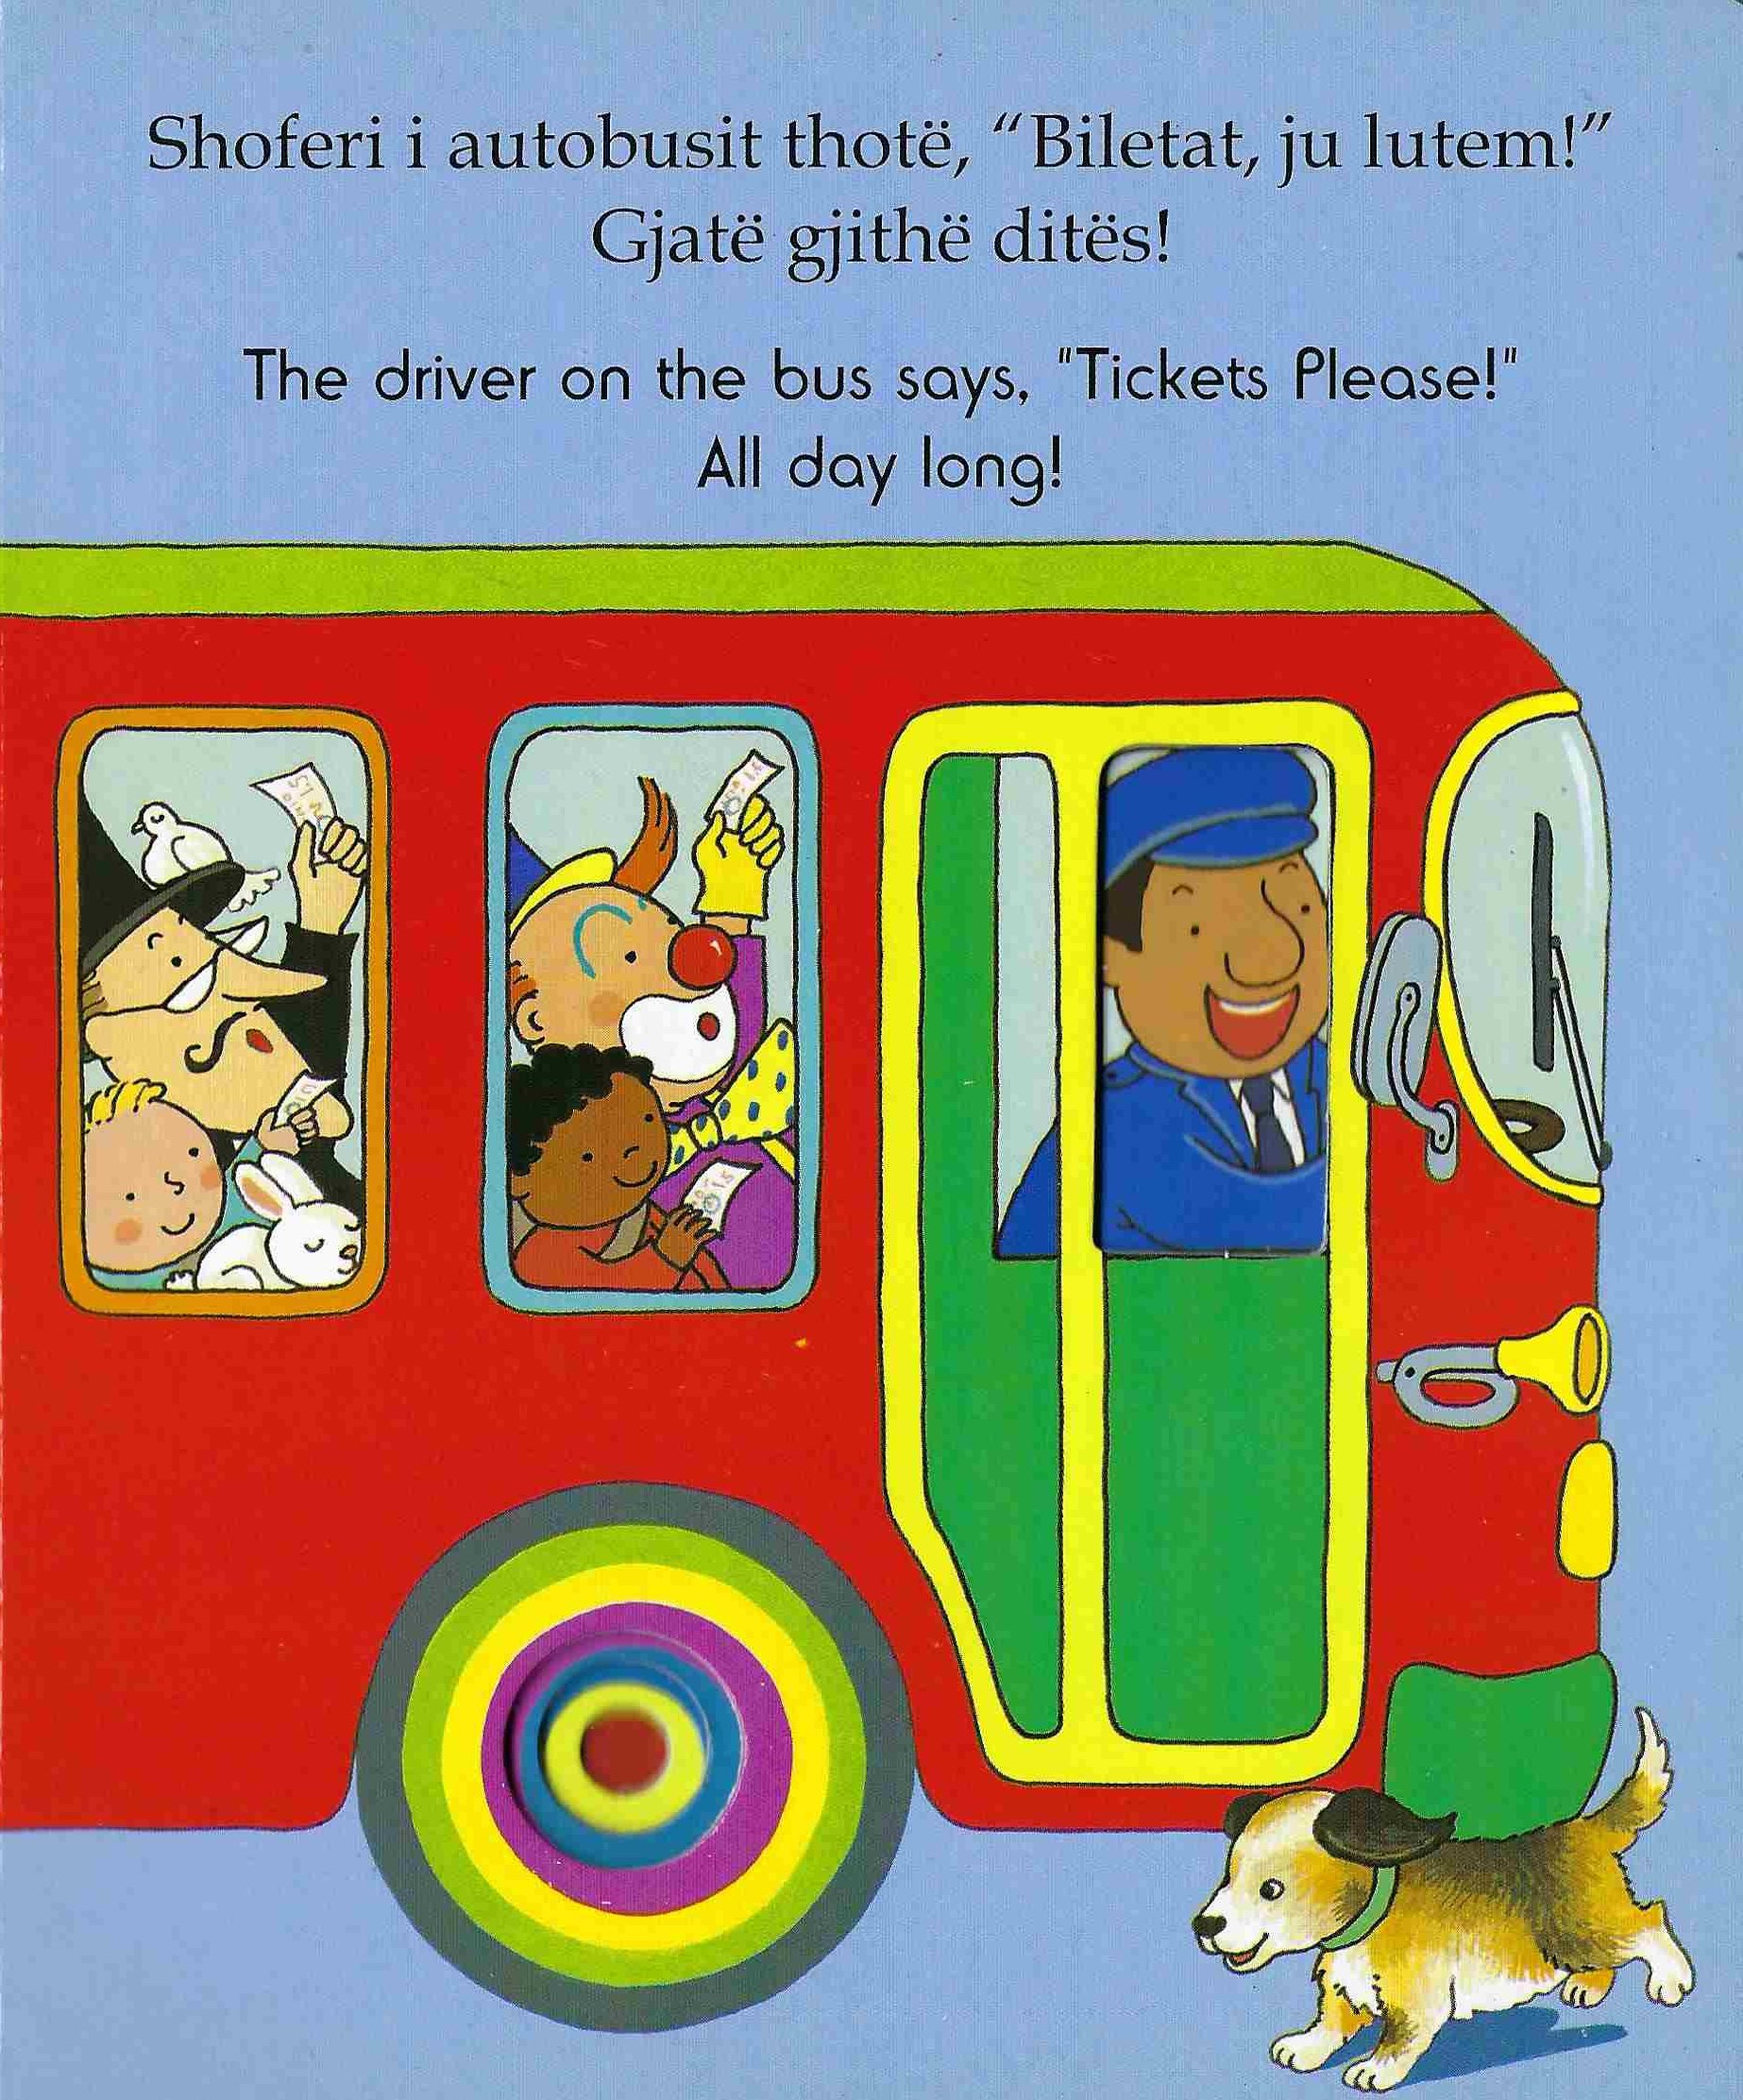 Bilingual Baby Books. Board Books for Baby, Toddler, and preschoolers